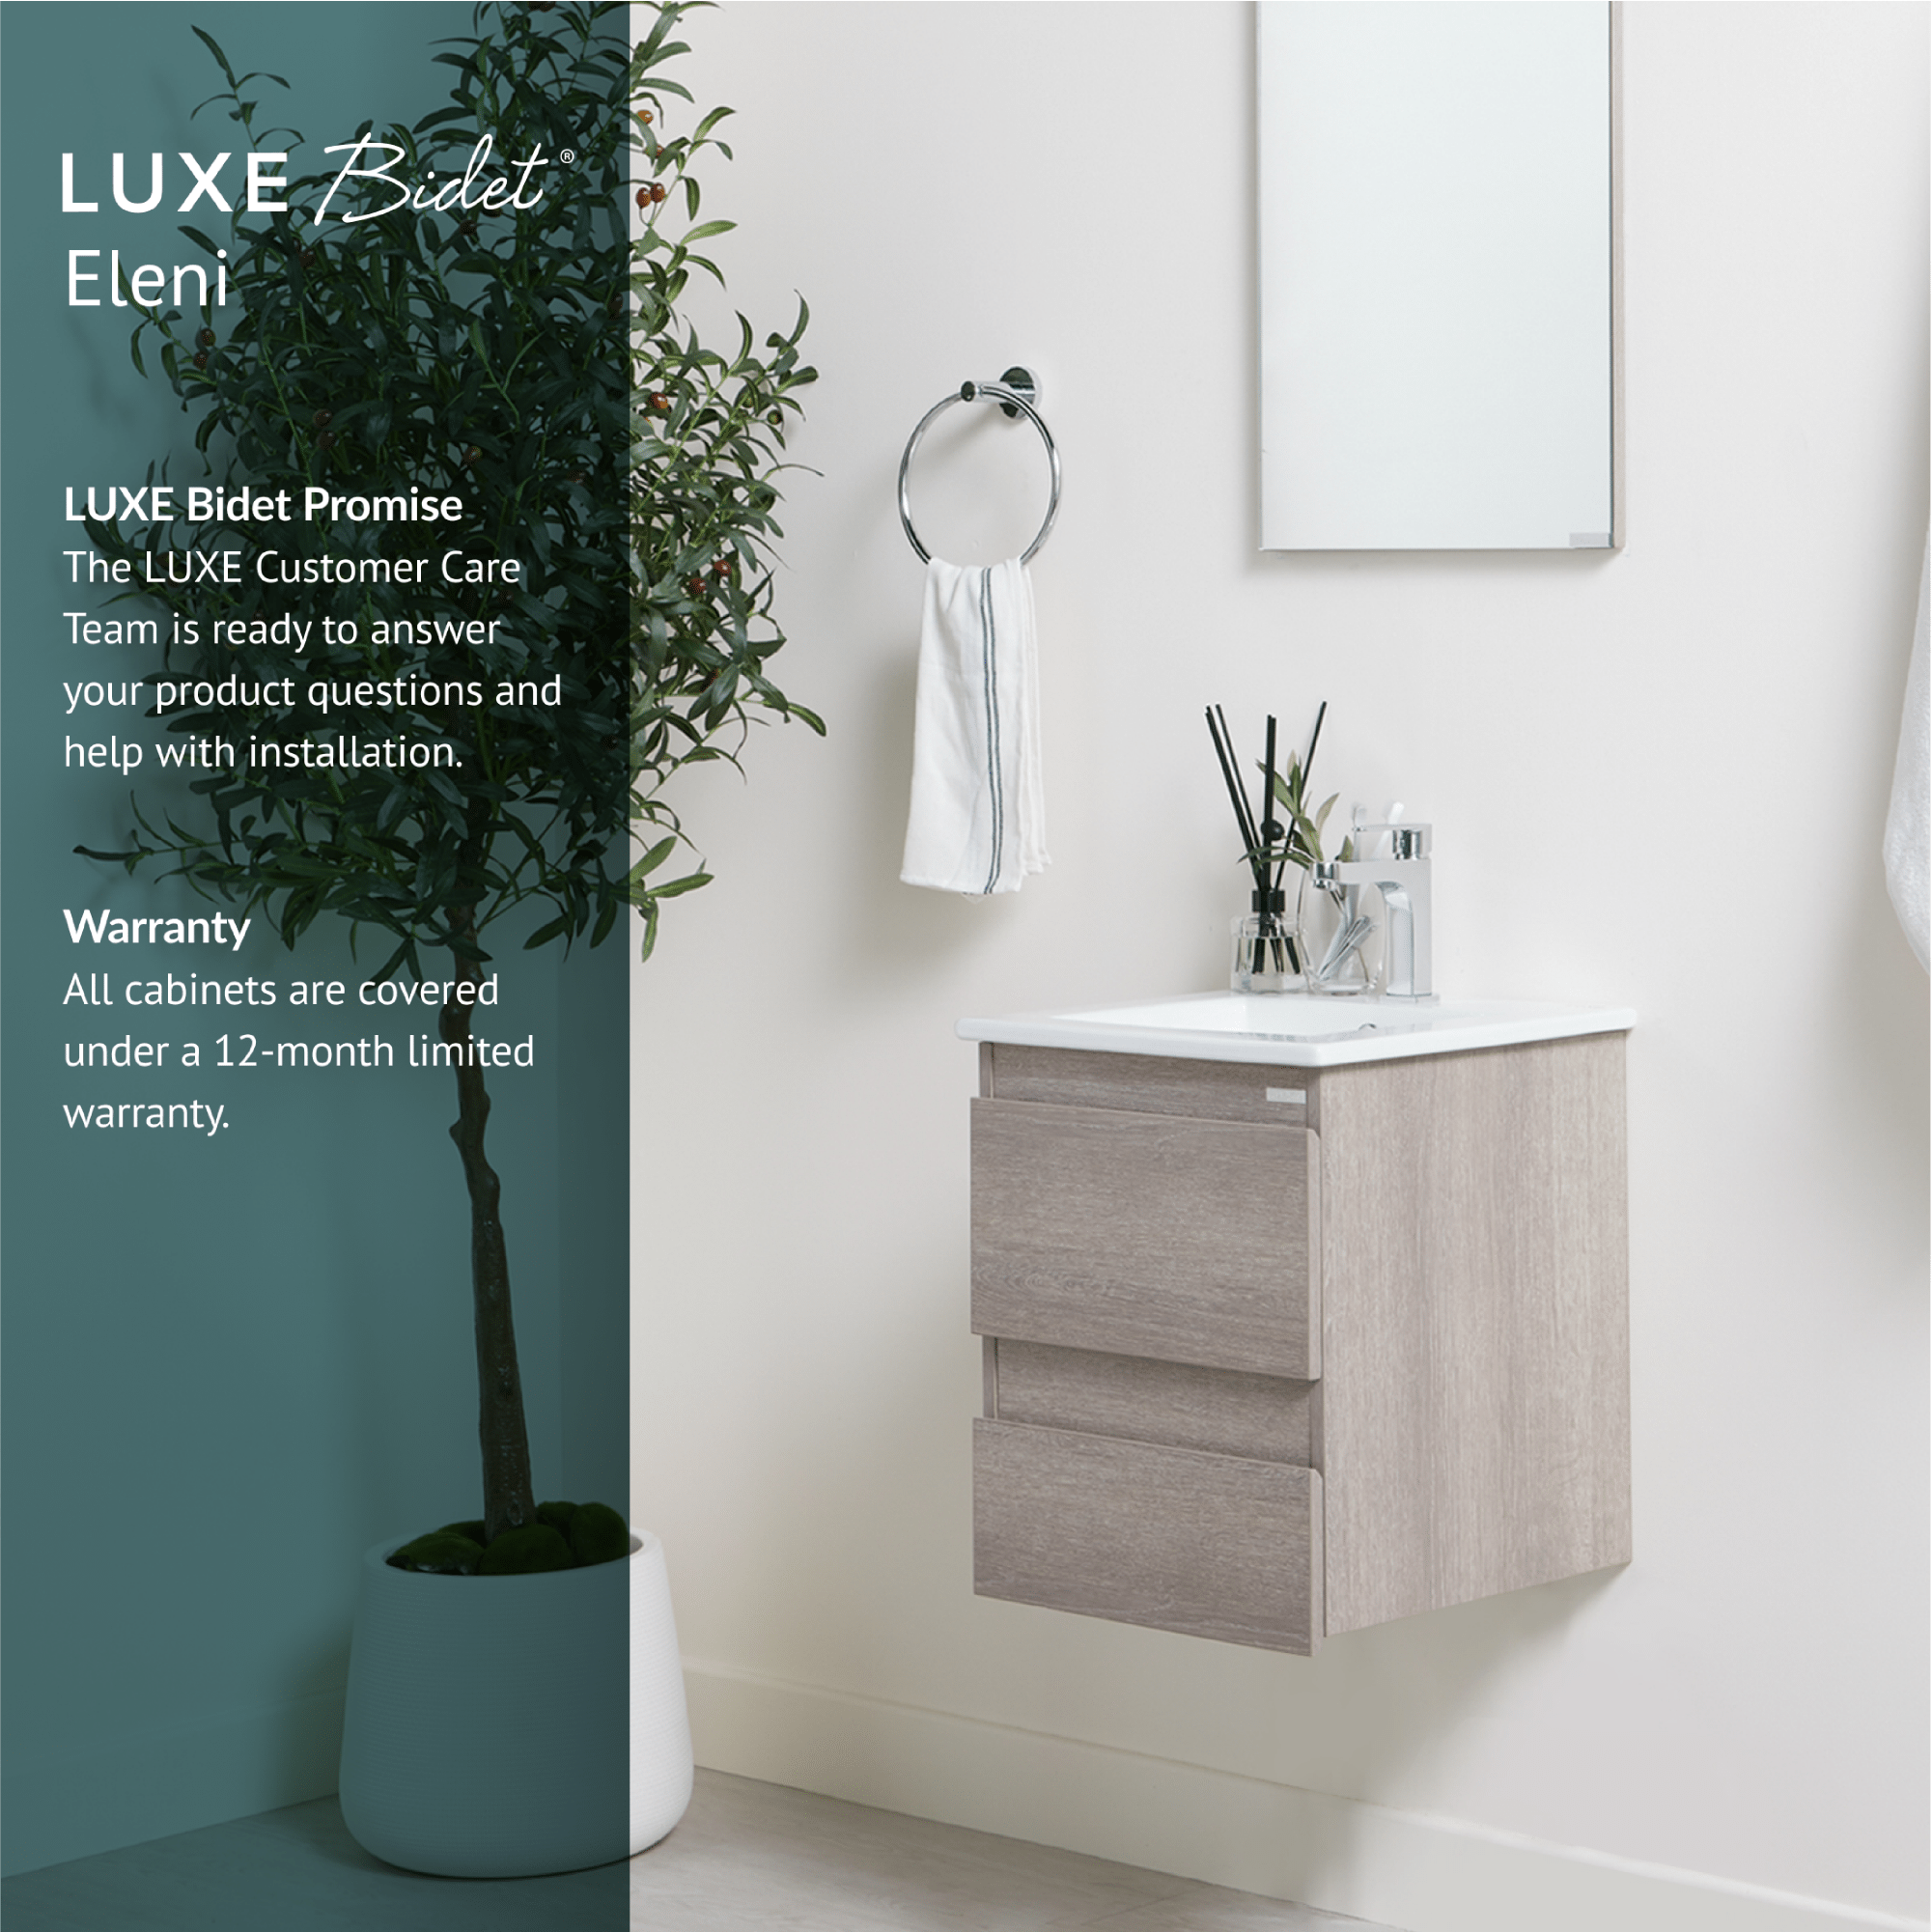 Eleni Bathroom Vanity Set is backed by the LUXE Bidet Promise and comes with a 12-month limited warranty.